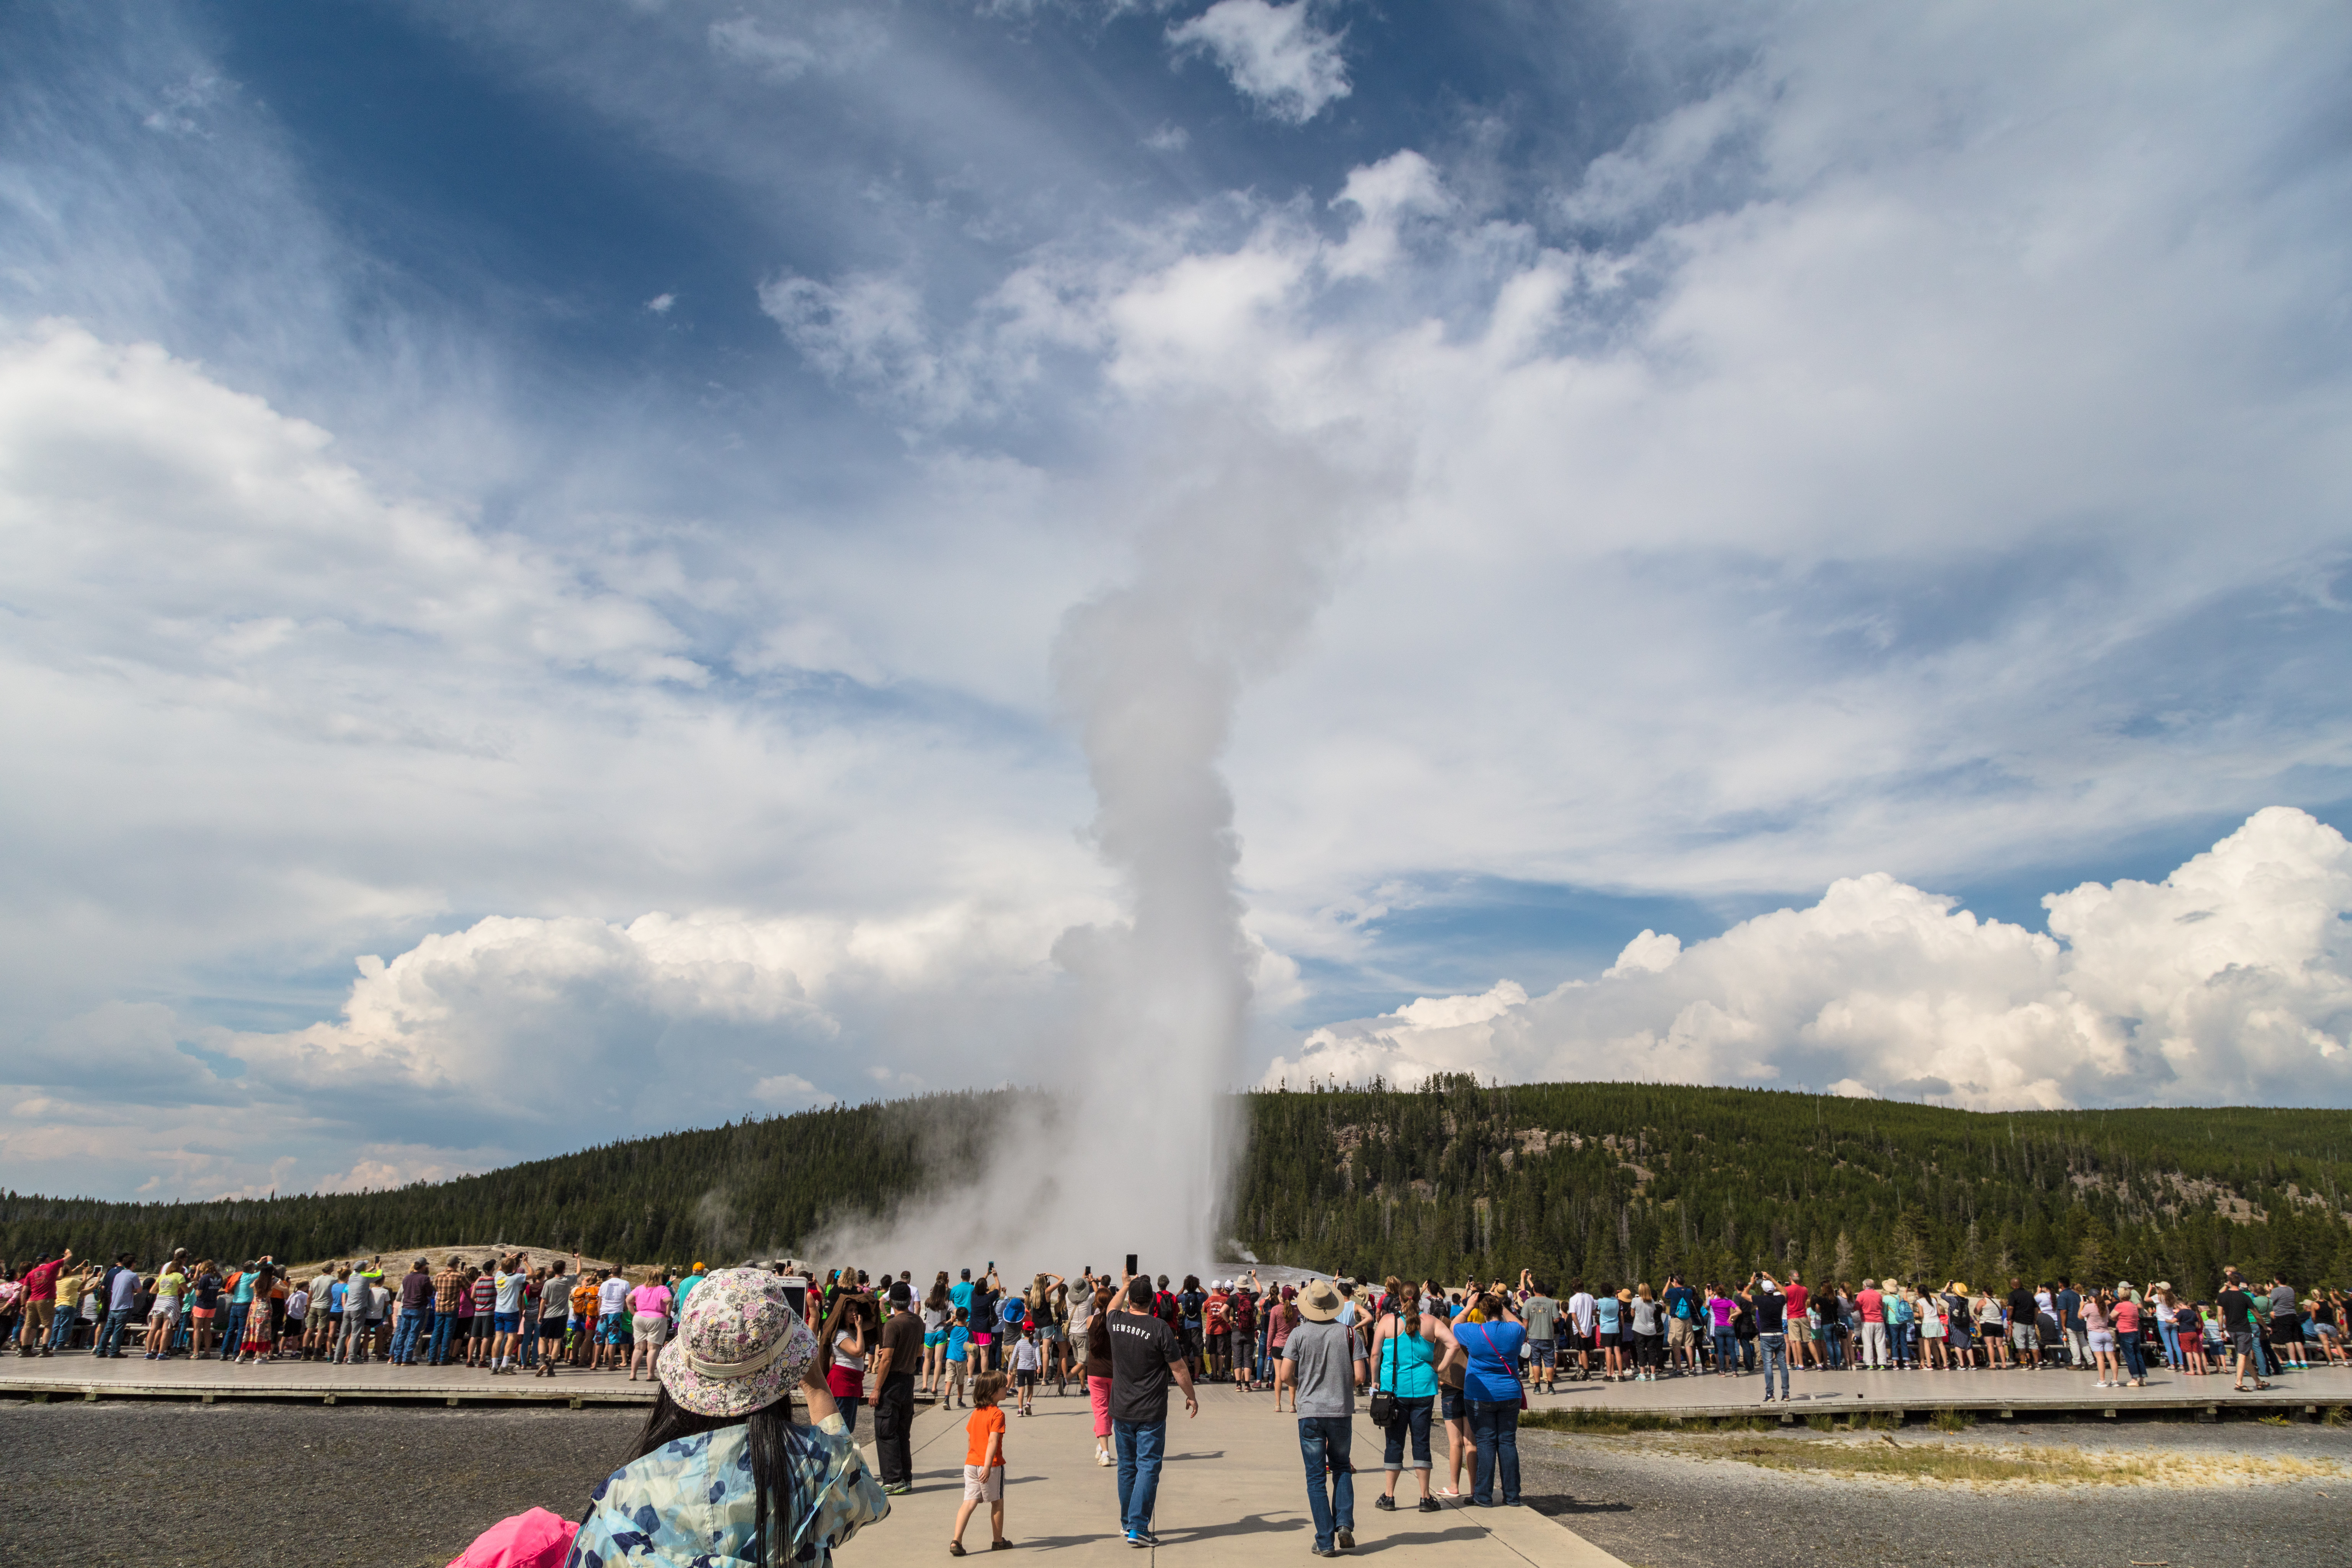 A crowd of people watching a geyser erupt